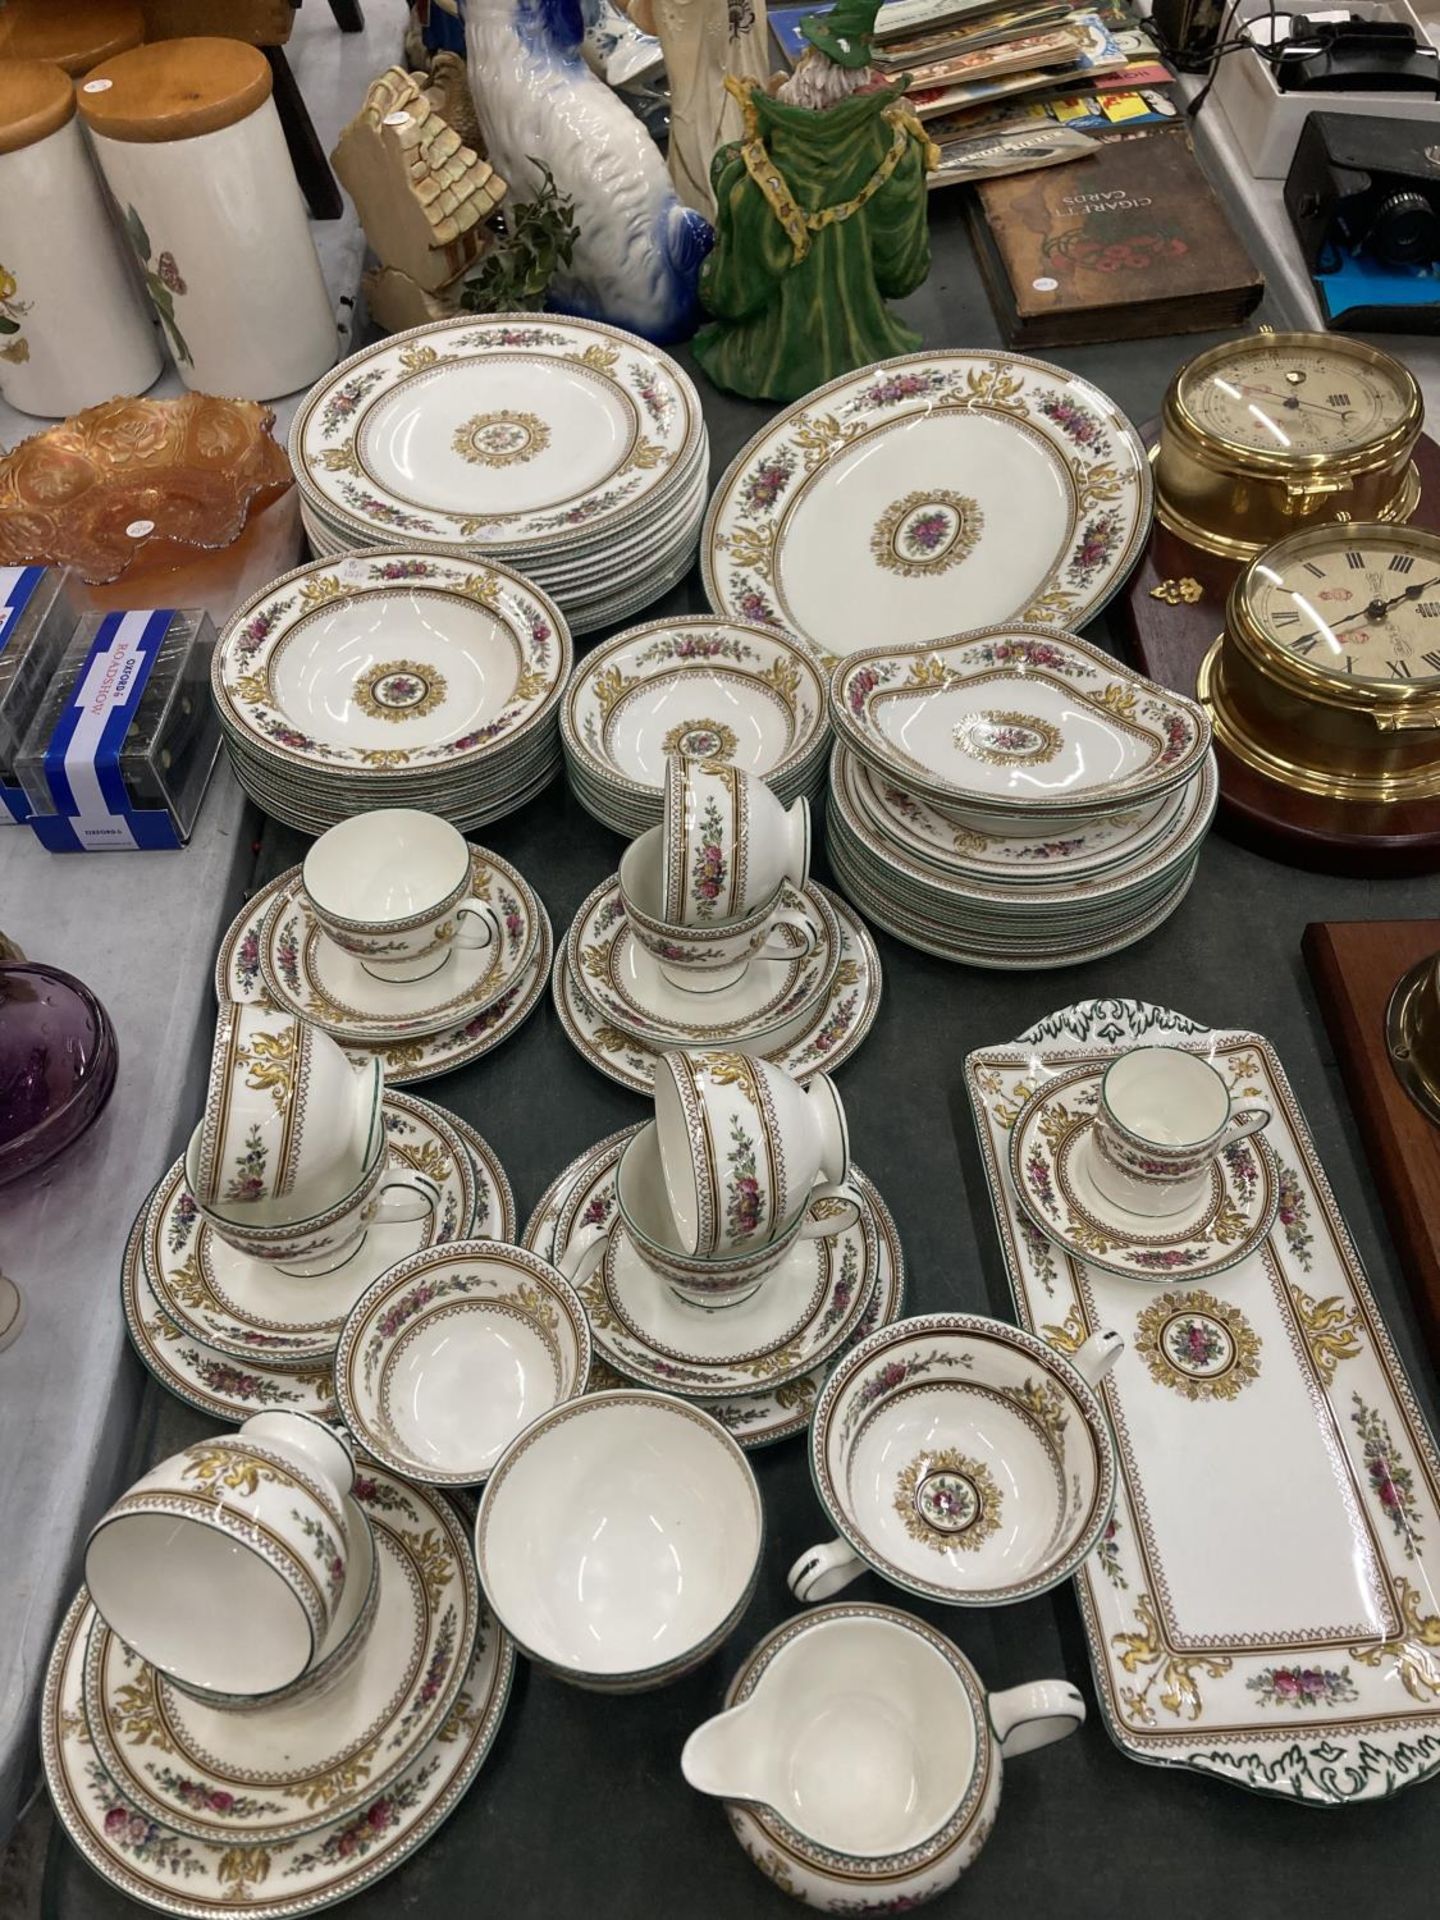 A LARGE QUANTITY OF WEDGWOOD 'COLUMBIA' DINNERWARE TO INCLUDE VARIOUS SIZES OF PLATES, BOWLS,